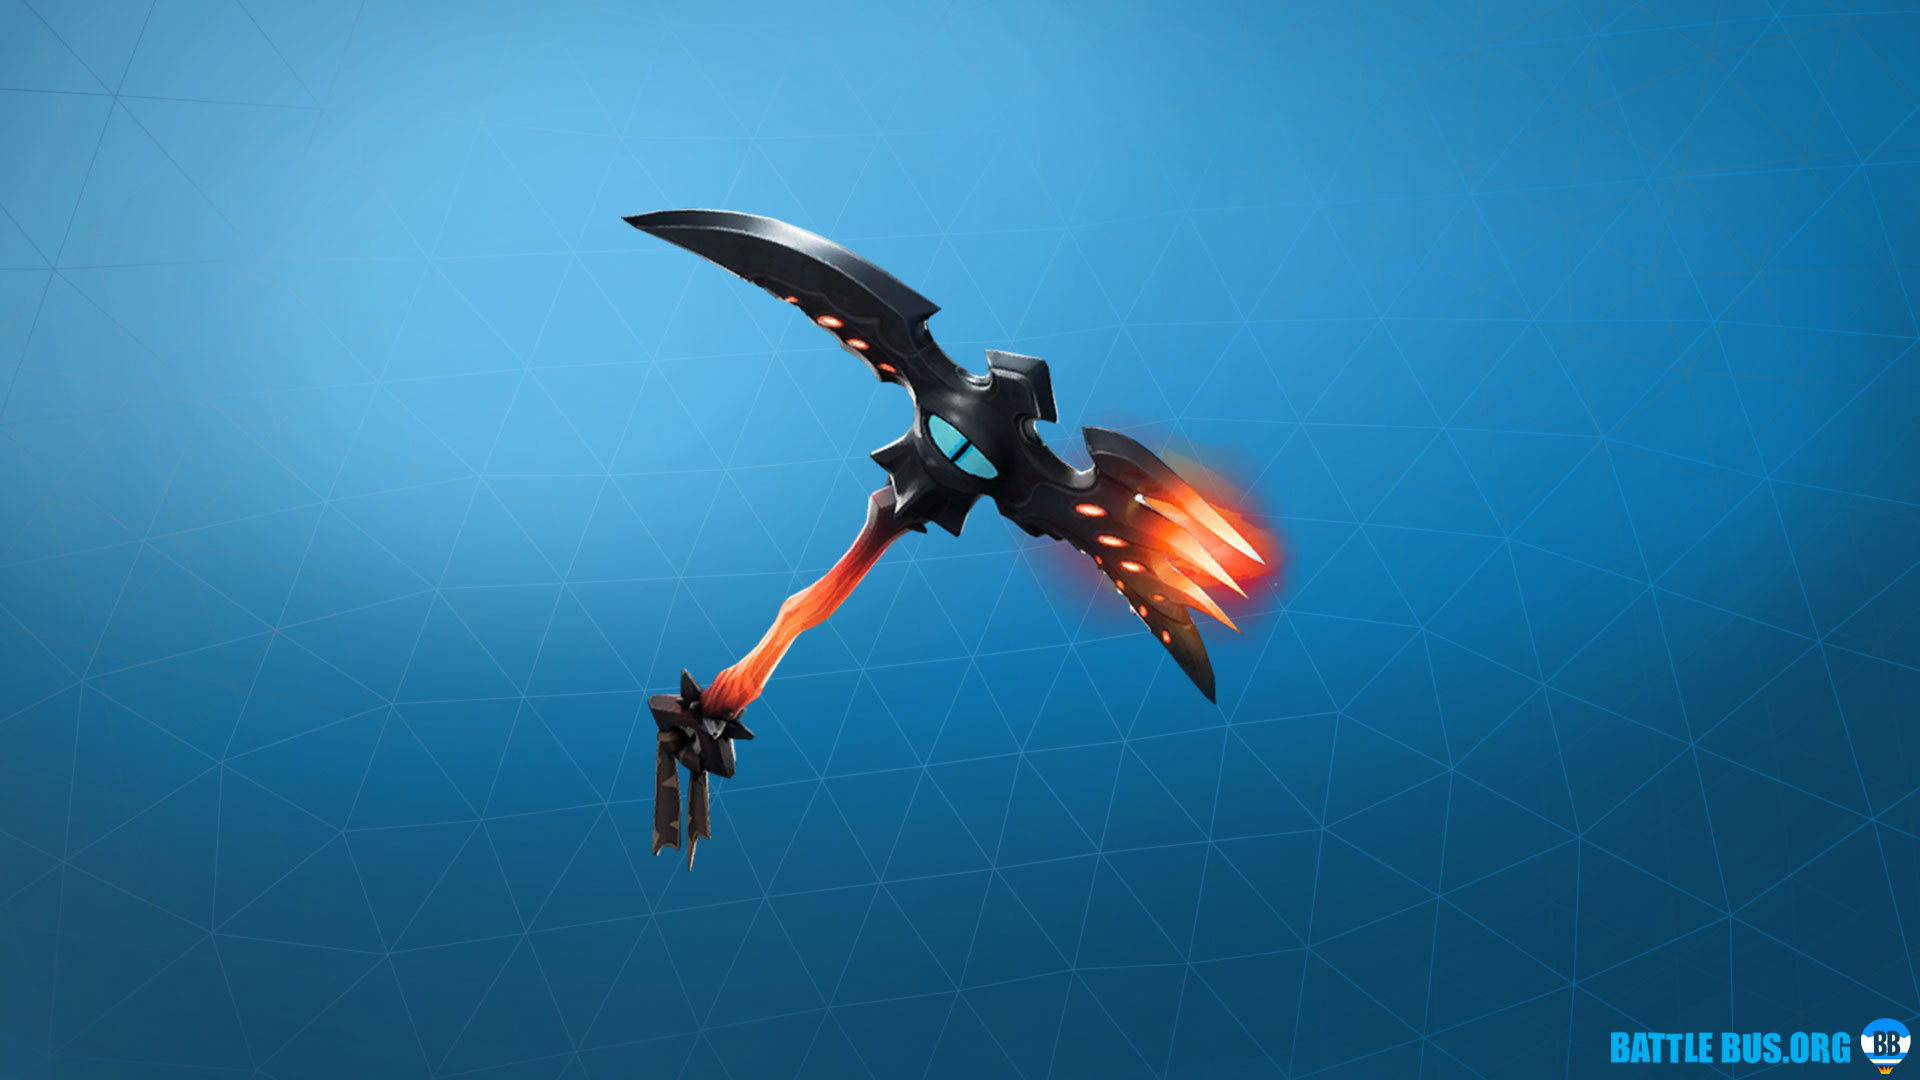 Pictures Of Fortnite Pickaxes Wallpapers